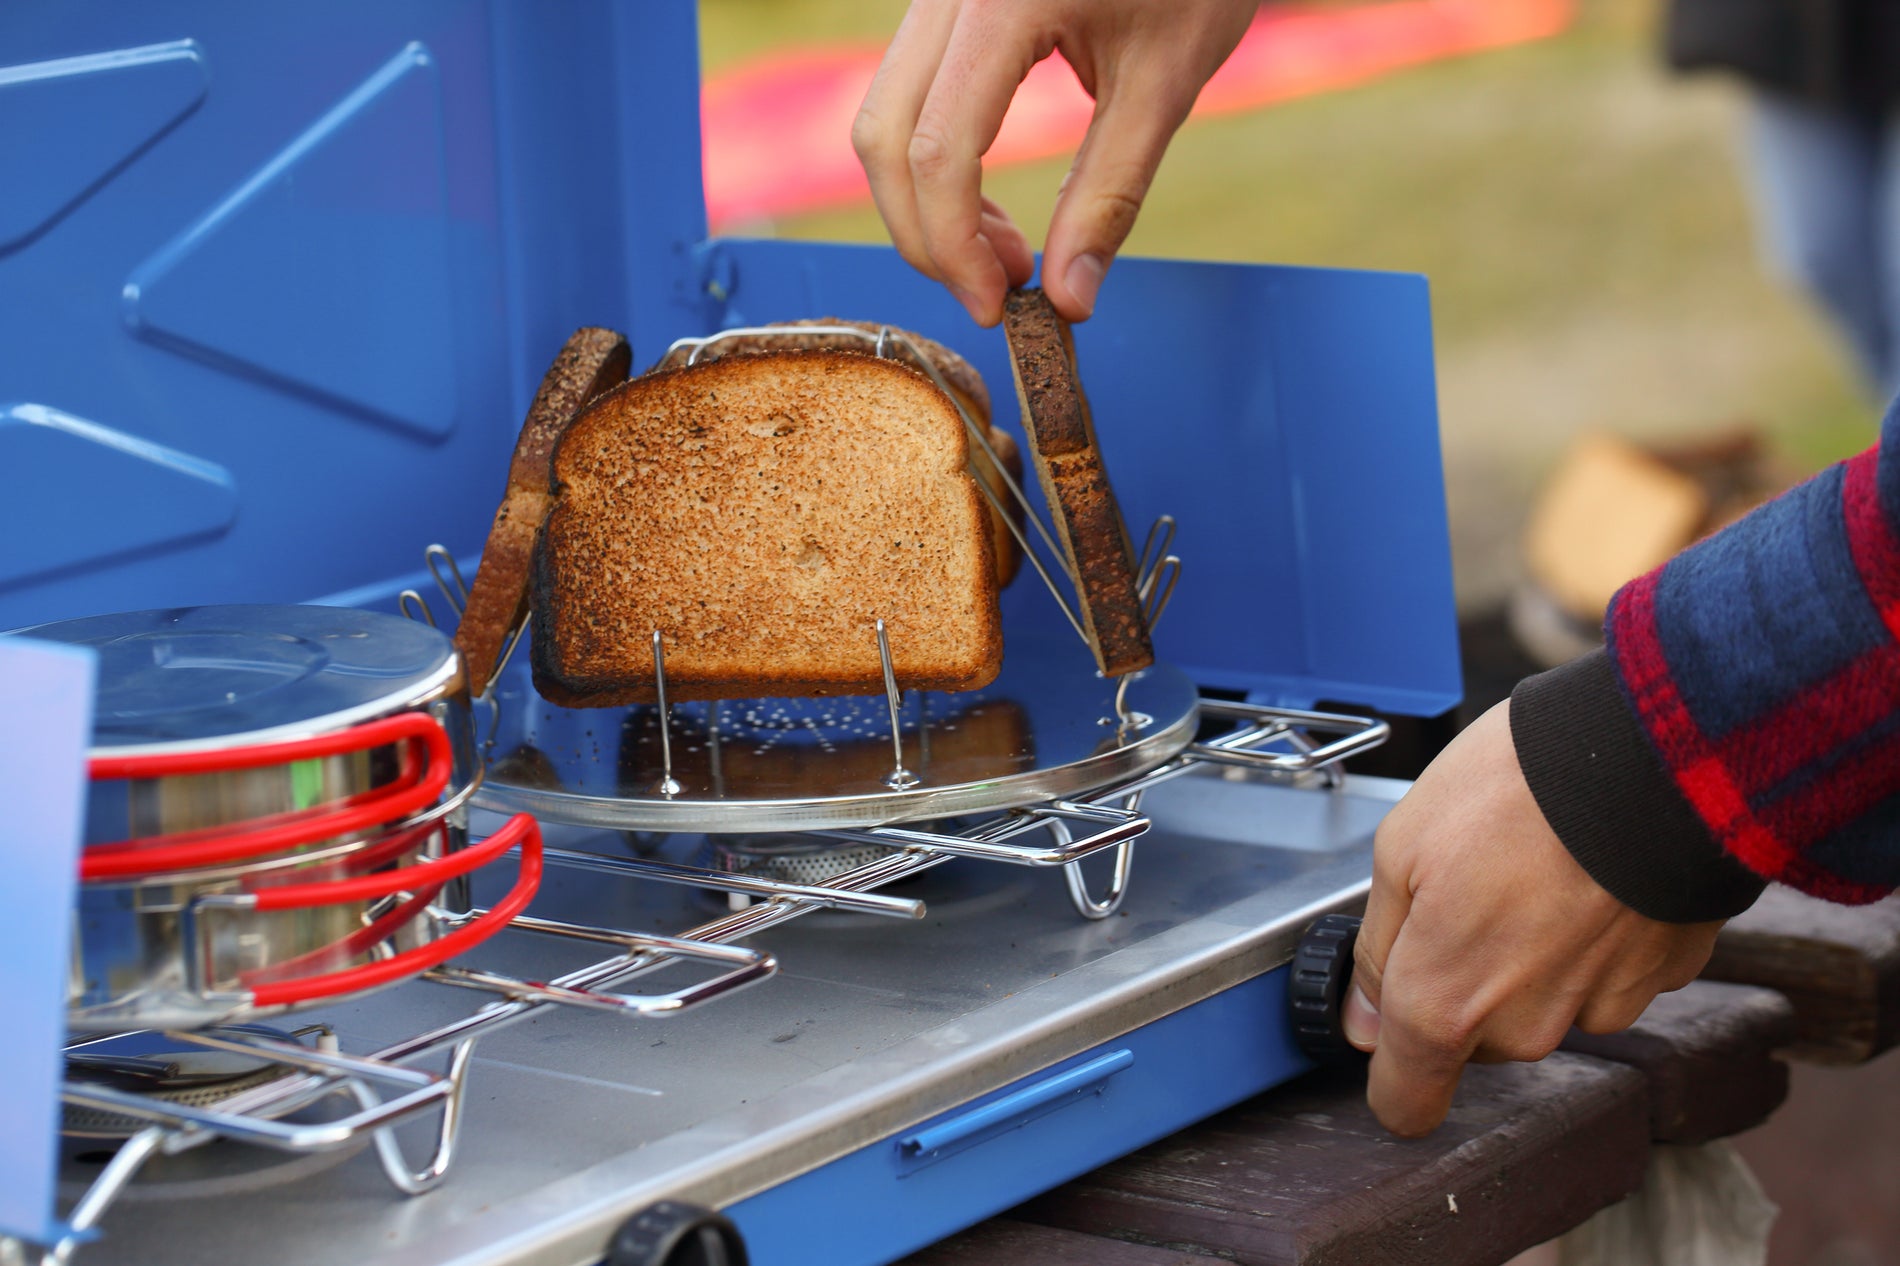 A person cooking toast on a picnic table using Coghlan's Camp Stove Toaster.